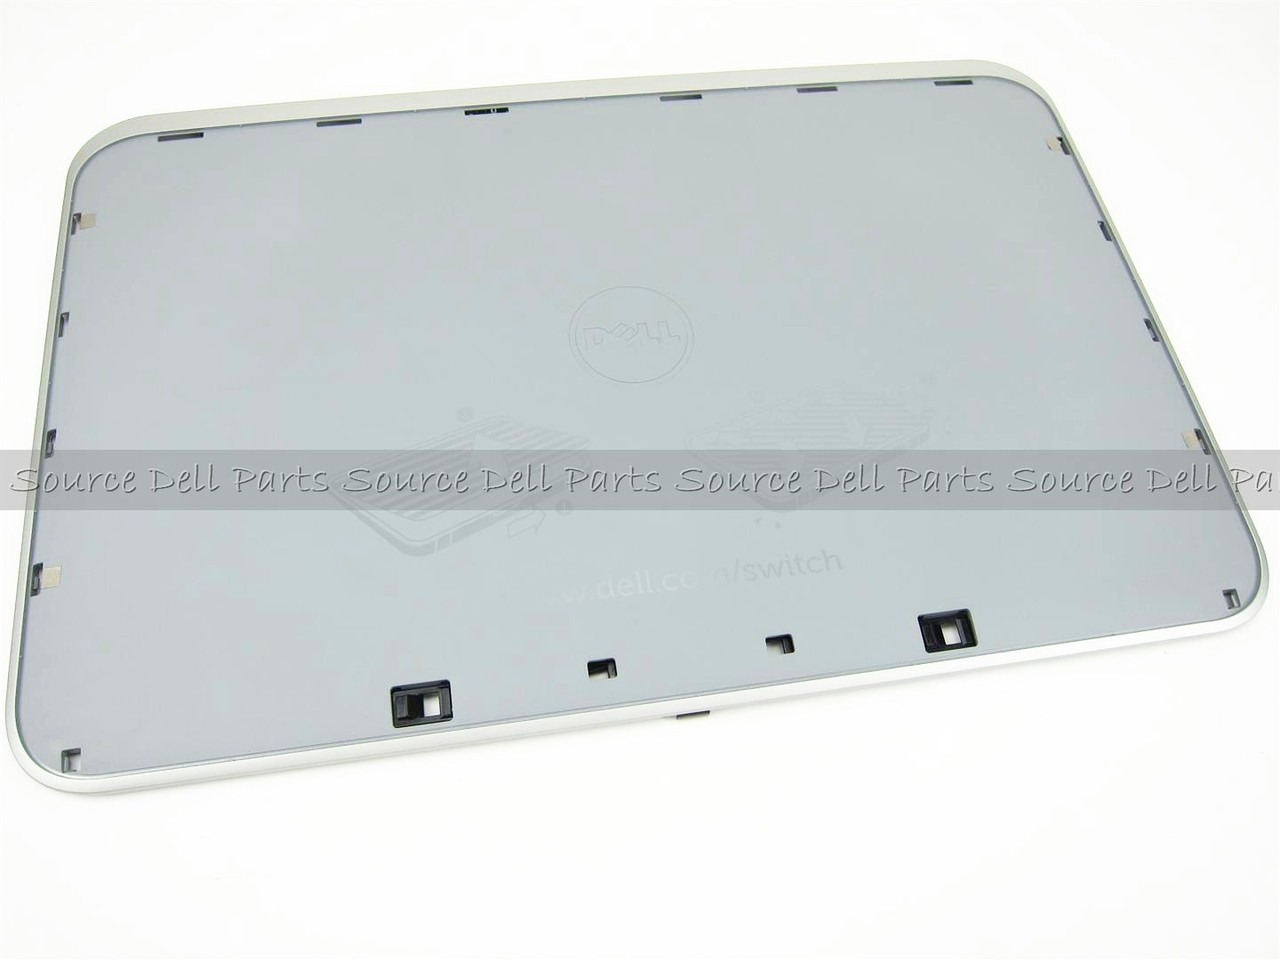 Dell Inspiron 17R 7720 / 5720 17.3" Switchable Lid Back Cover - JPRK0 (A)